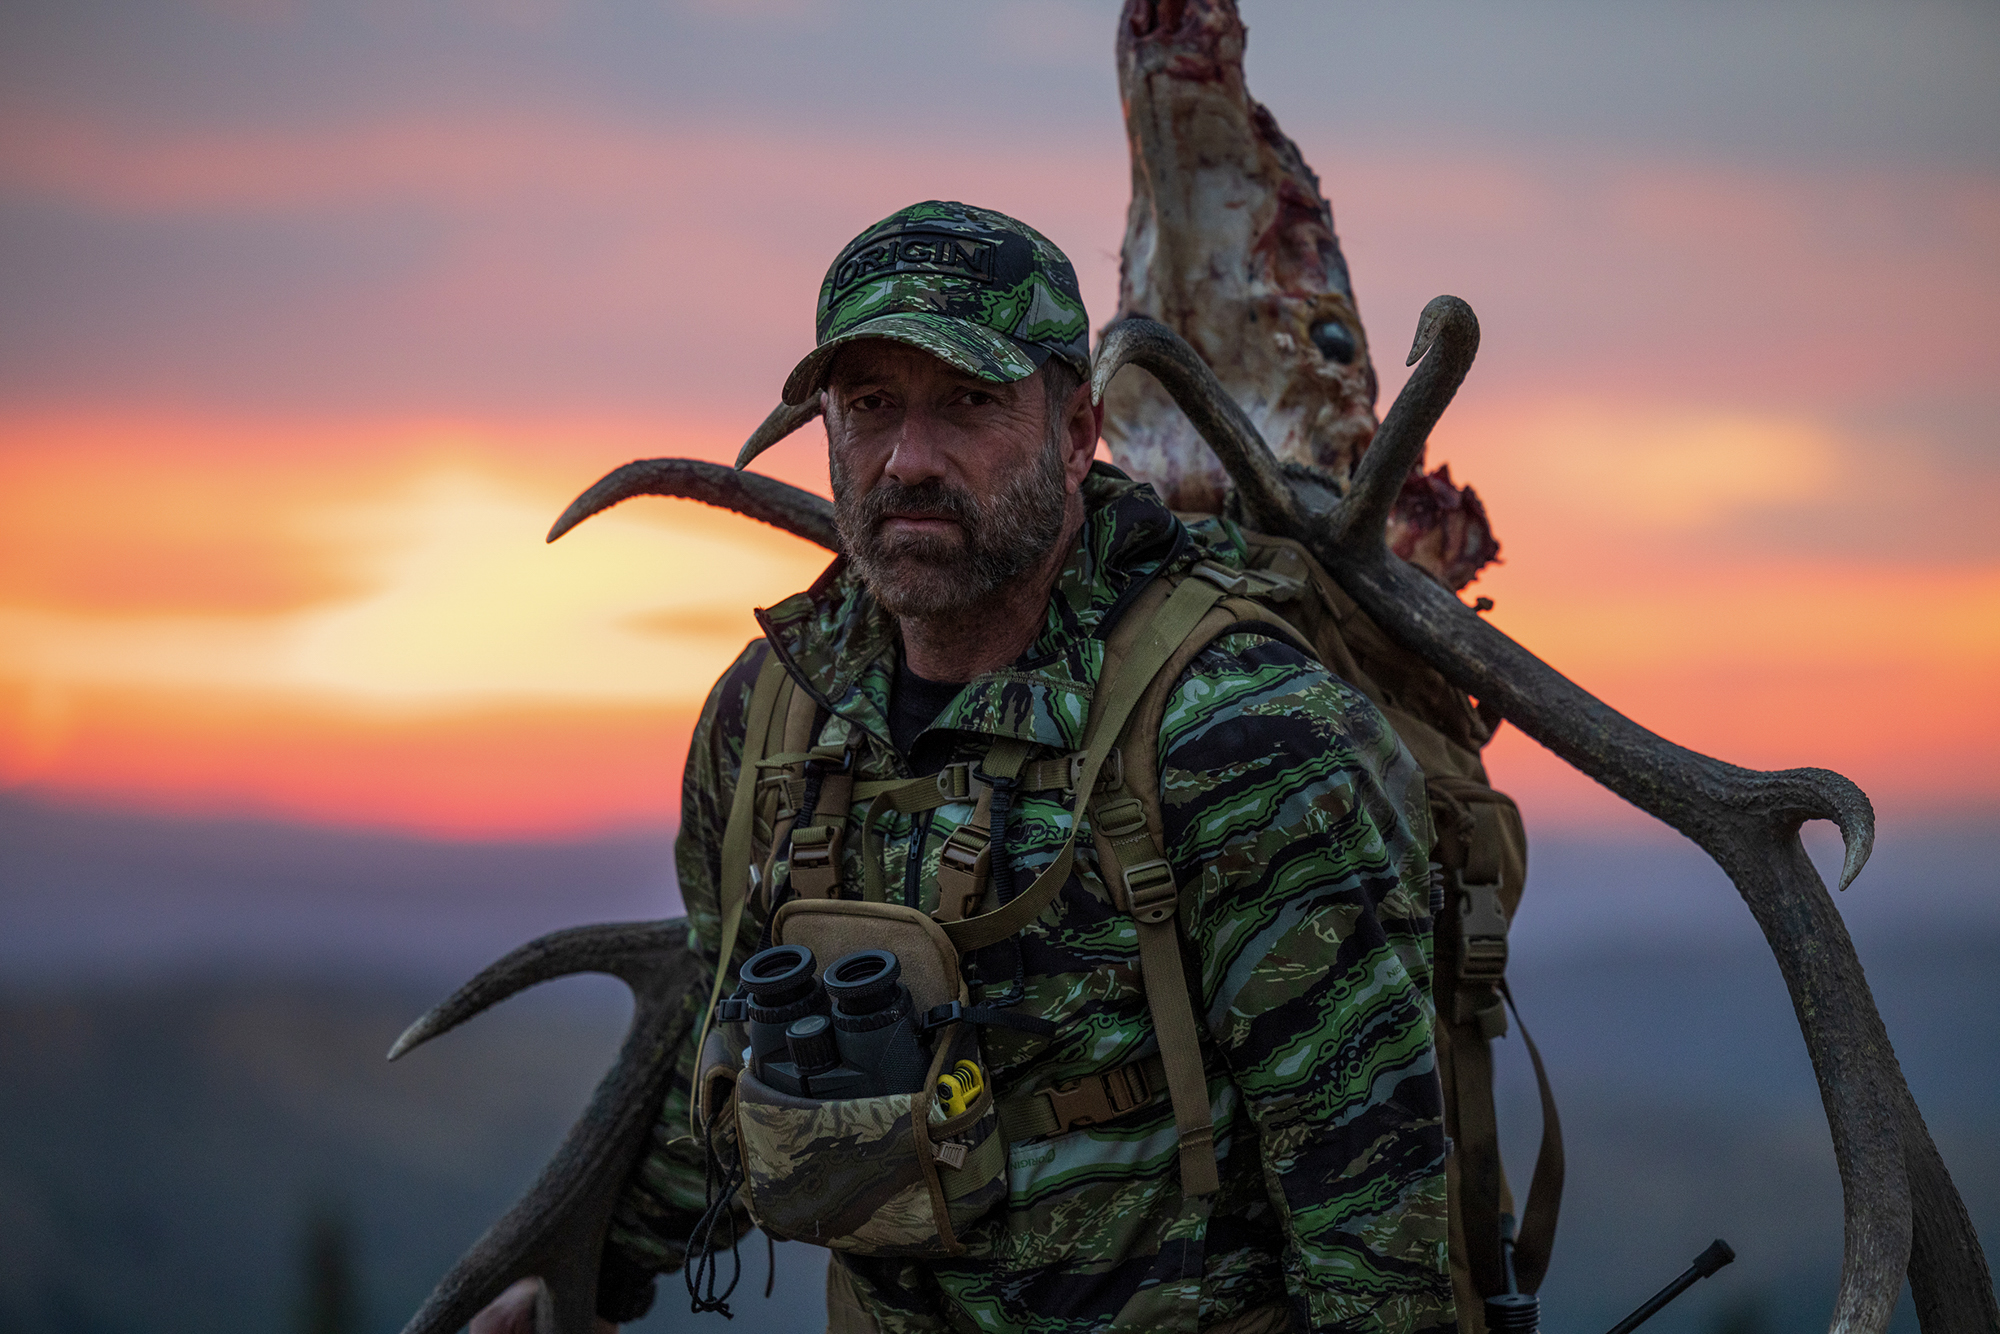 Game Technical Apparel - Rising star in hunting, camouflage and